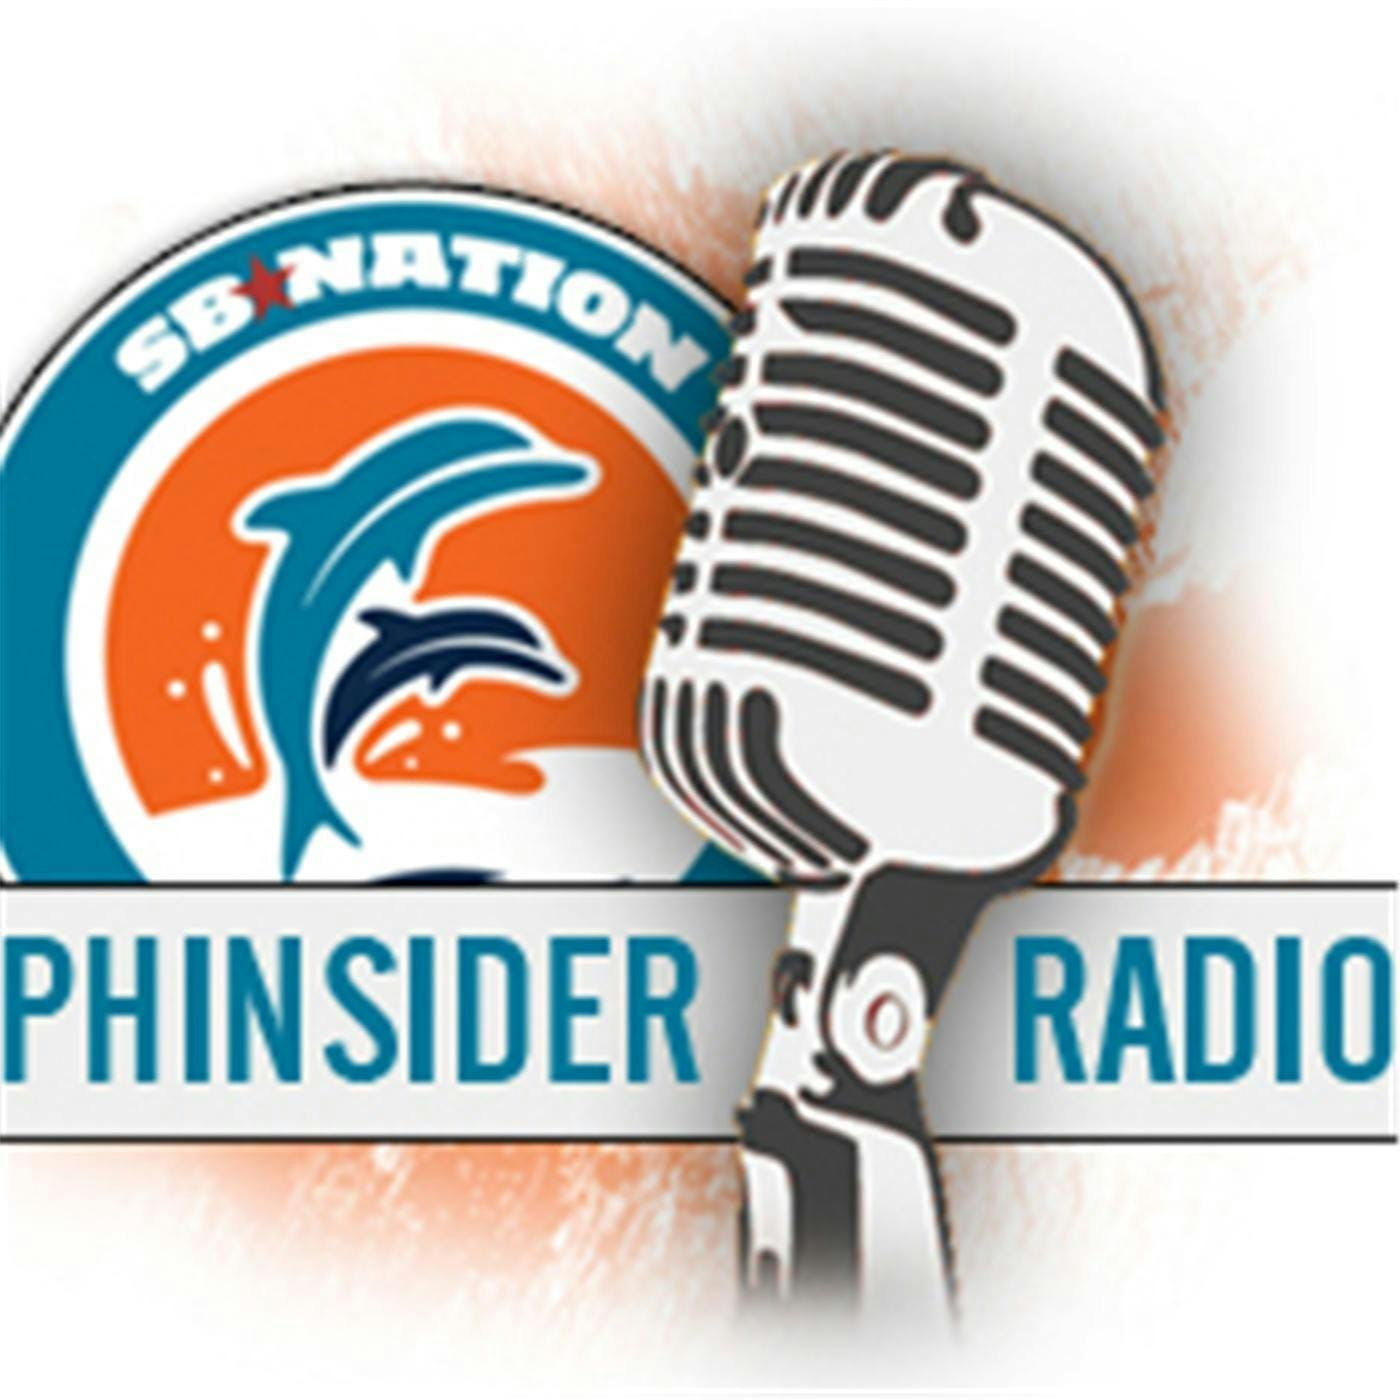 Phinsider Radio - First OTA session and the NFL policy regarding national anthem